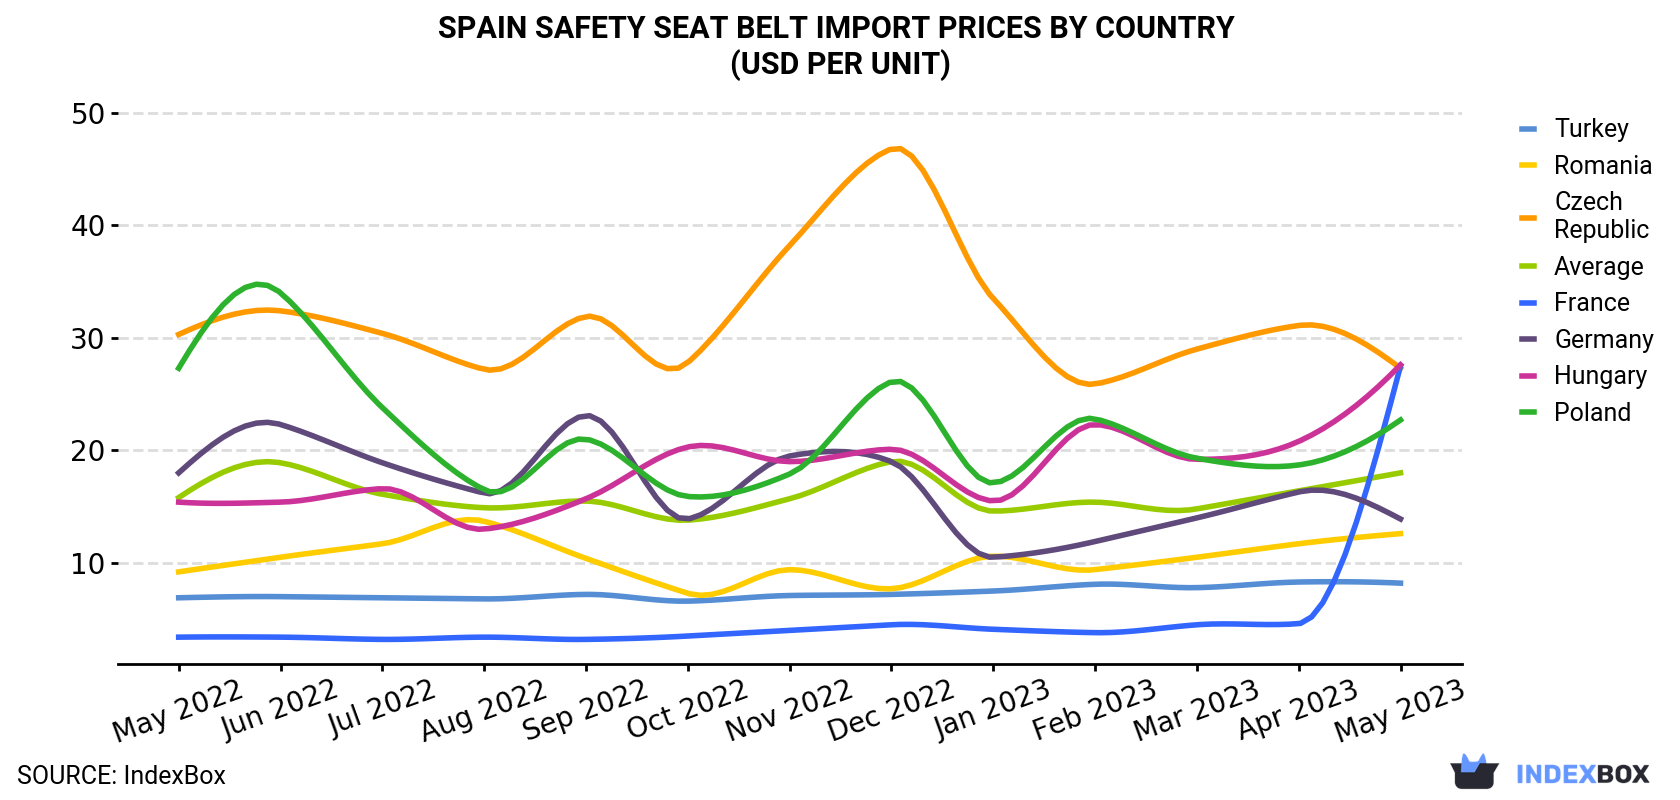 Spain Safety Seat Belt Import Prices By Country (USD Per Unit)